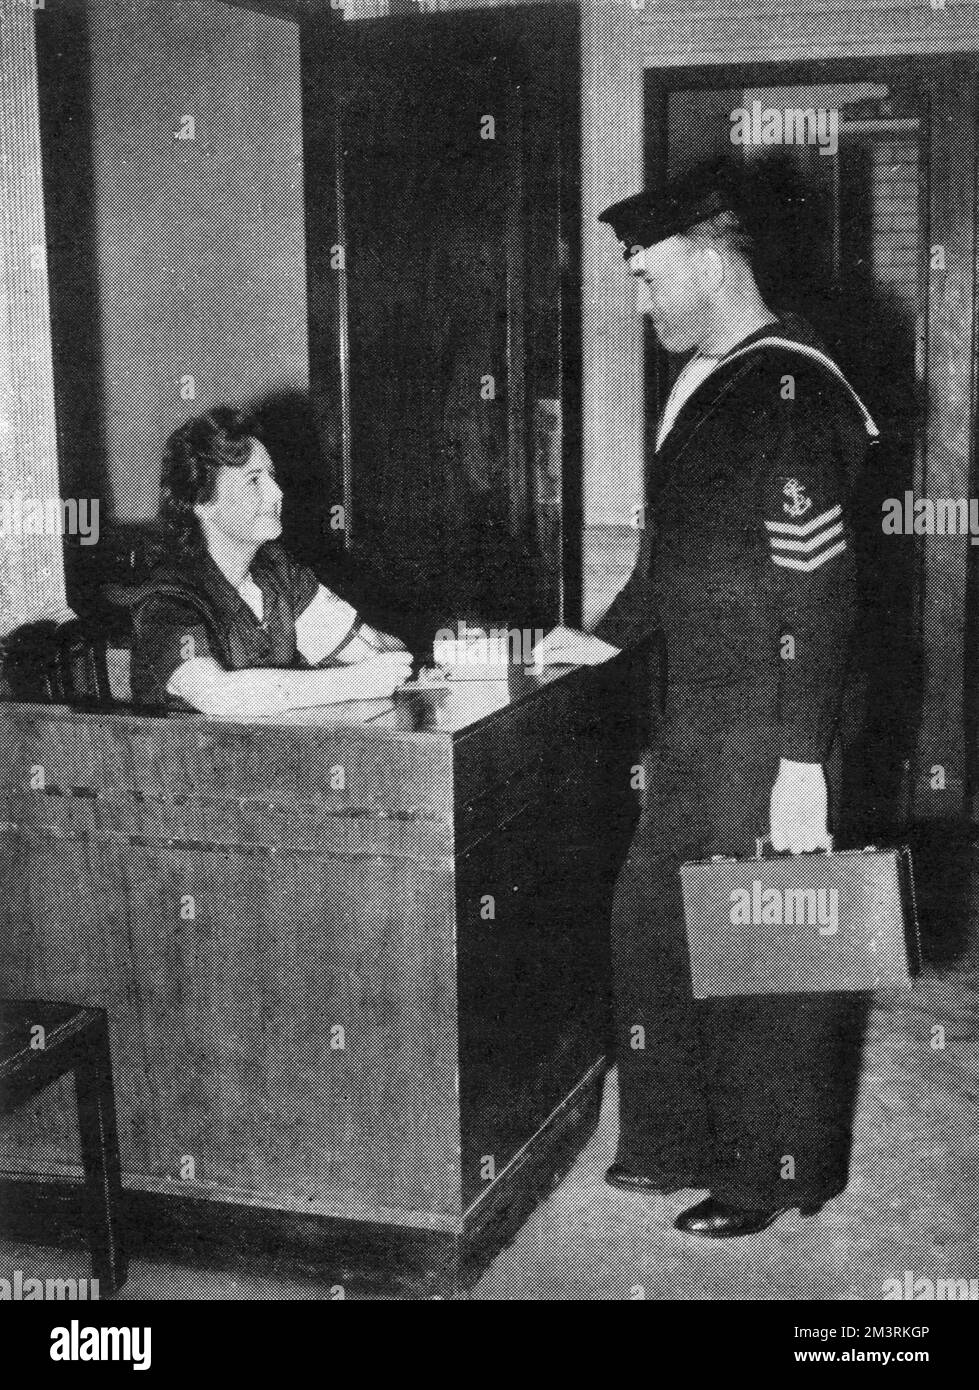 A sailor checks into the Y.M.C.A. hostel, formerly the restaurant Gatti's on The Strand, London. Gatti's was taken over by the Y.M.C.A. as a canteen for troops stationed in the city.  1940 Stock Photo